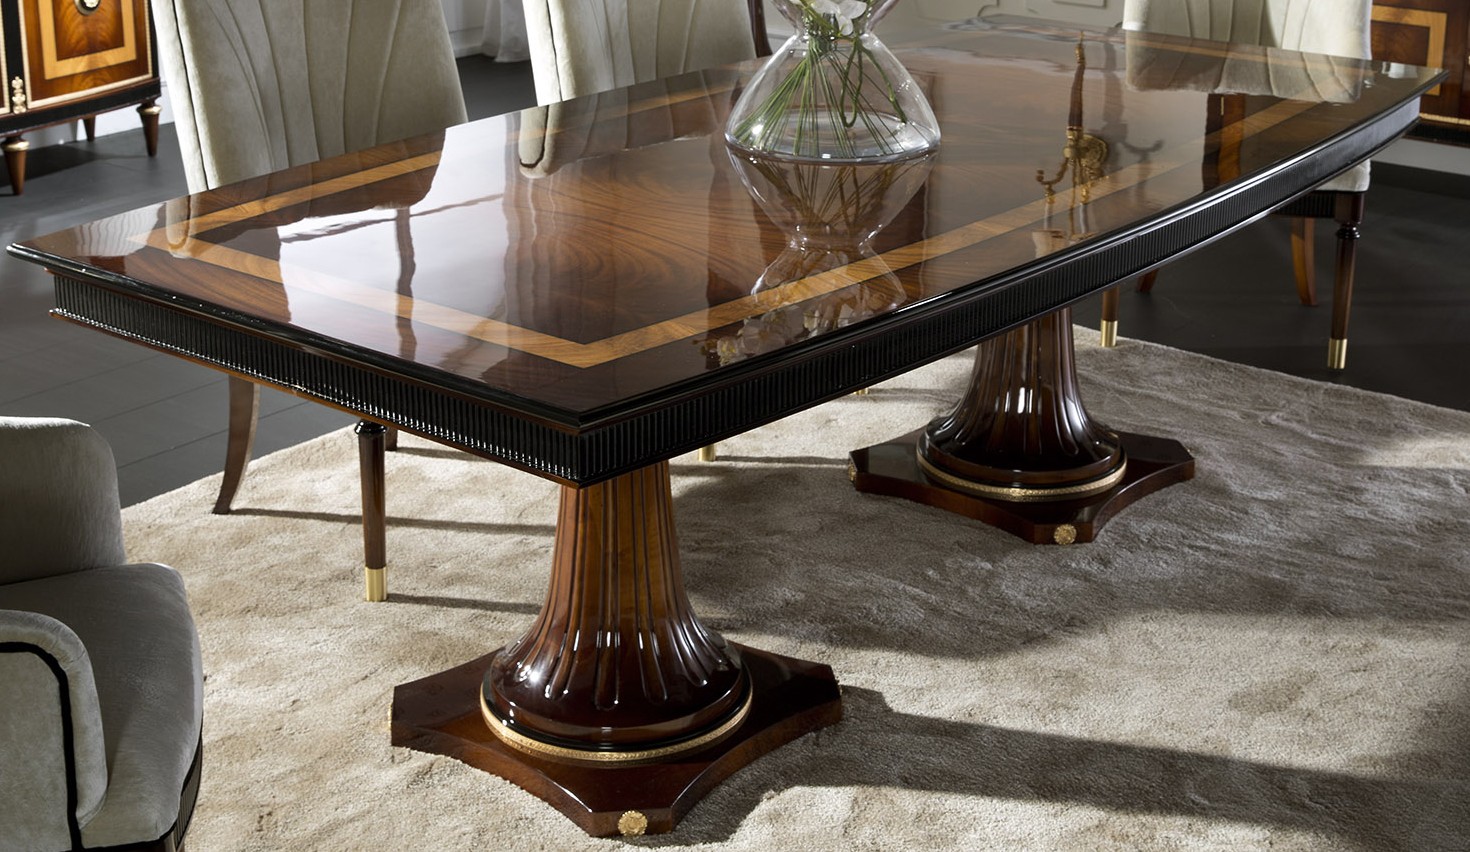 DINING ROOM FURNITURE WESTERLY COLLECTION. DINING TABLE